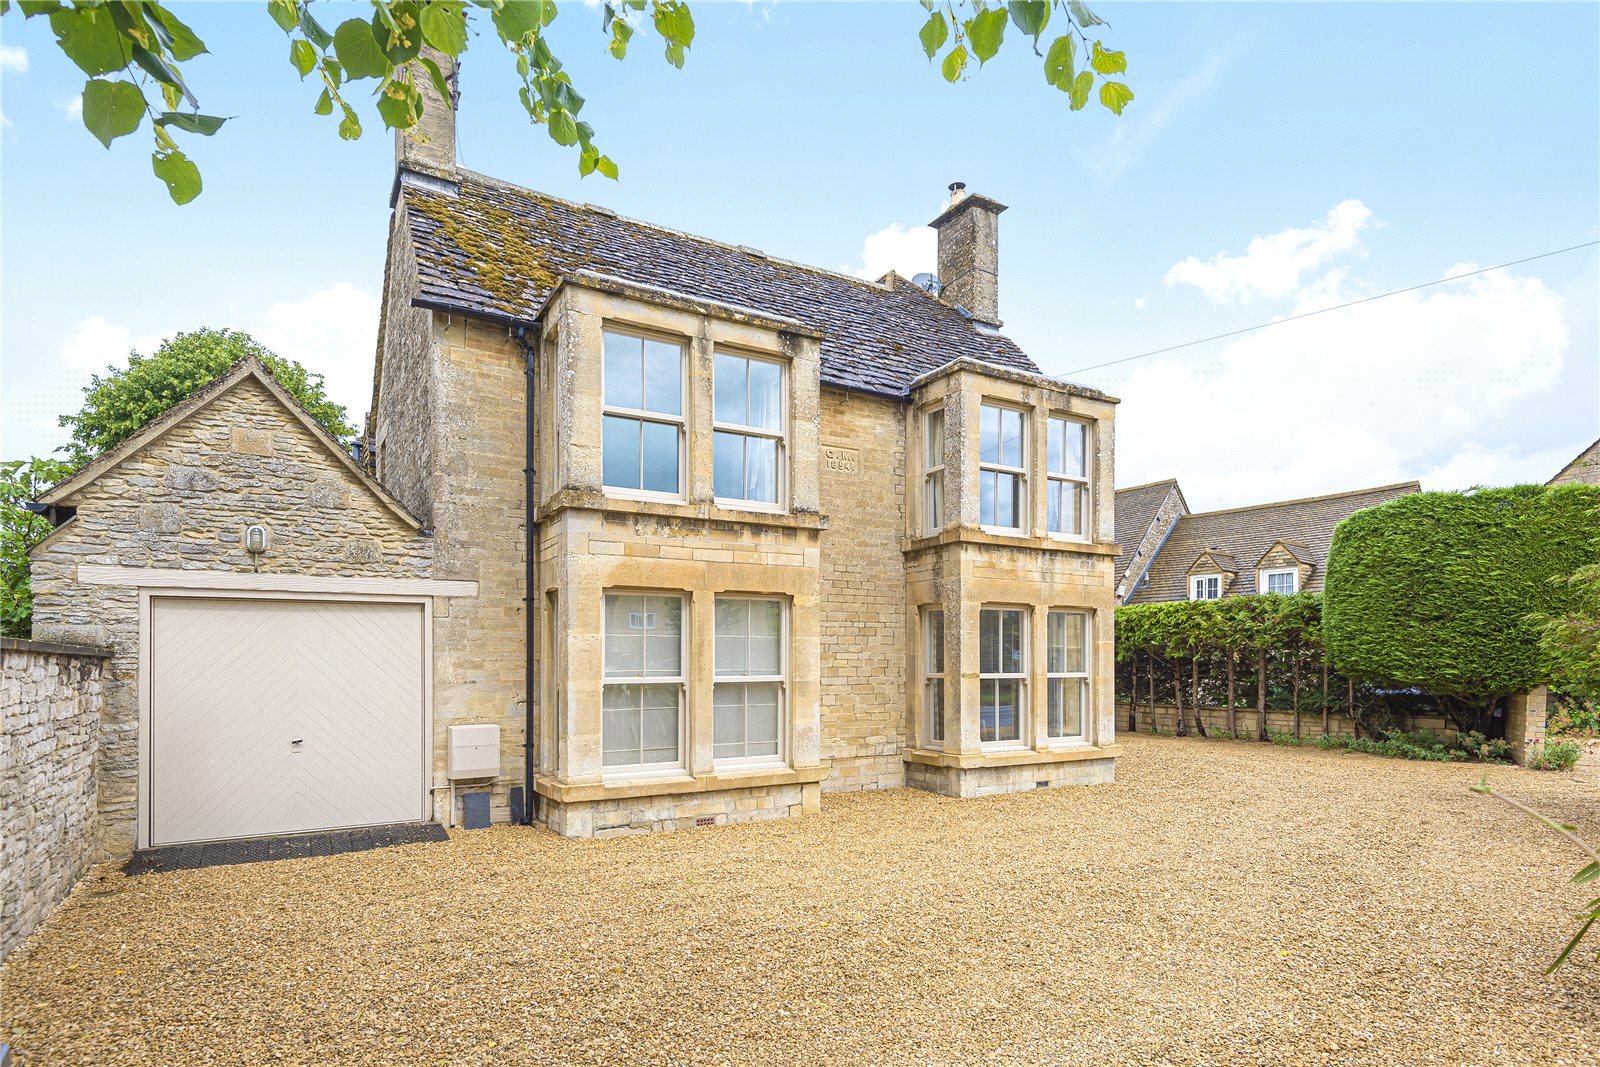 Burford Road, Lechlade, Gloucestershire, GL7